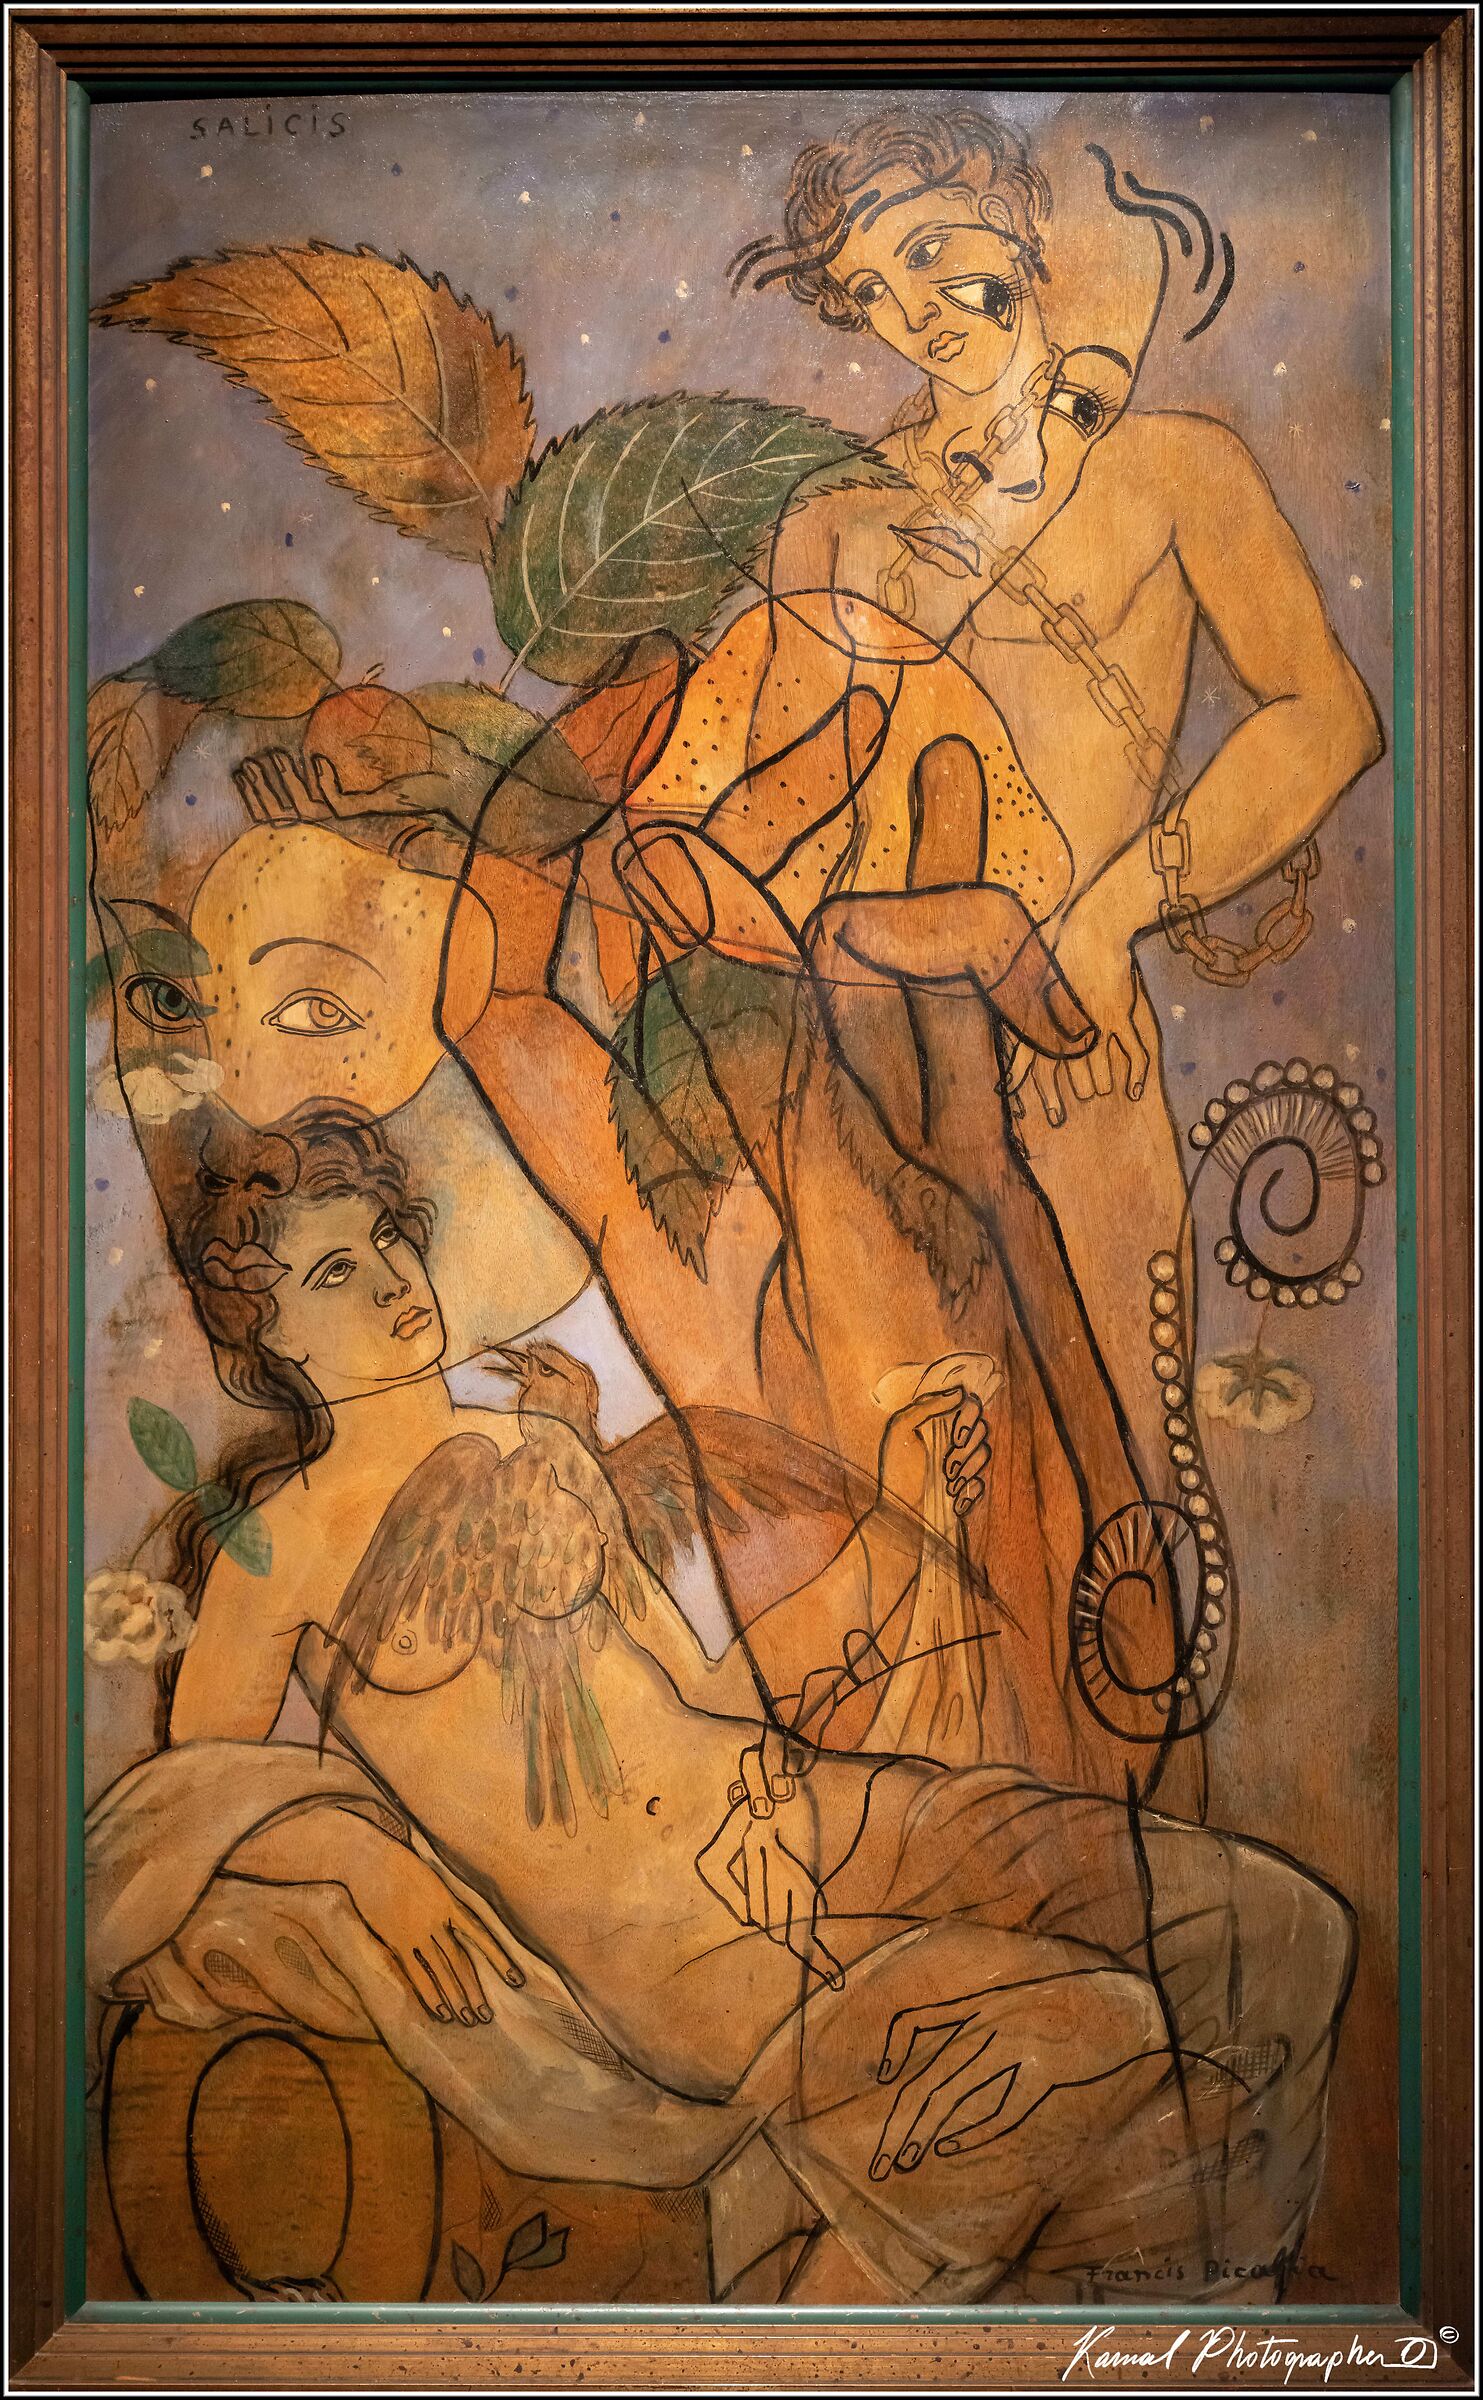 Salicis' by Francis Picabia (1929)...